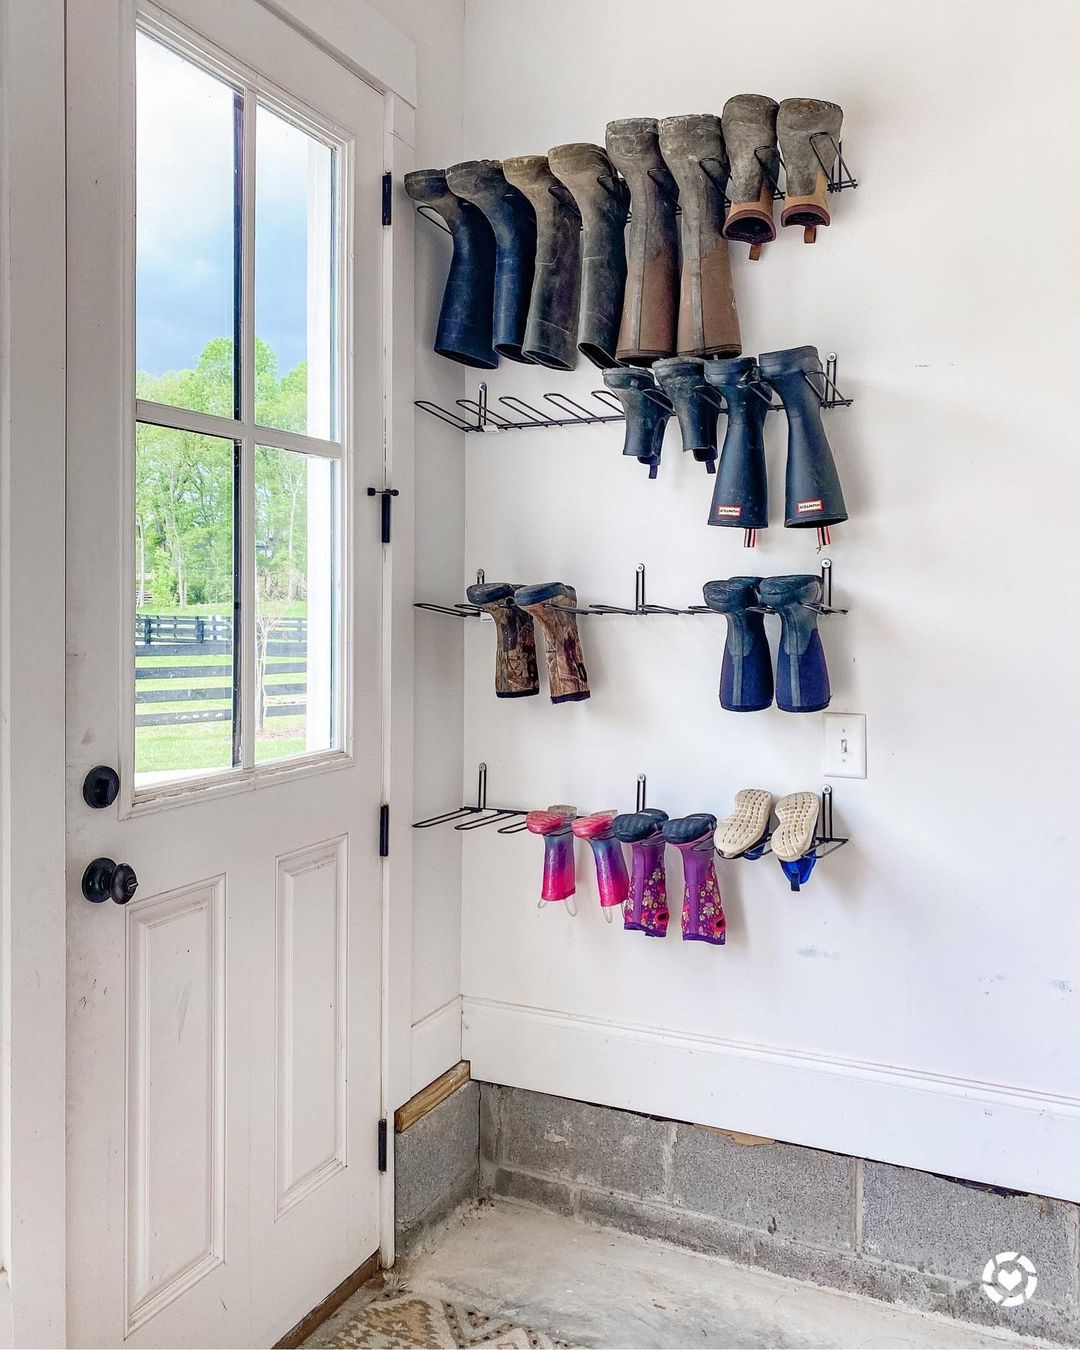 https://www.extraspace.com/blog/wp-content/uploads/2020/12/shoe-storage-ideas-dont-forget-about-your-boots.jpg